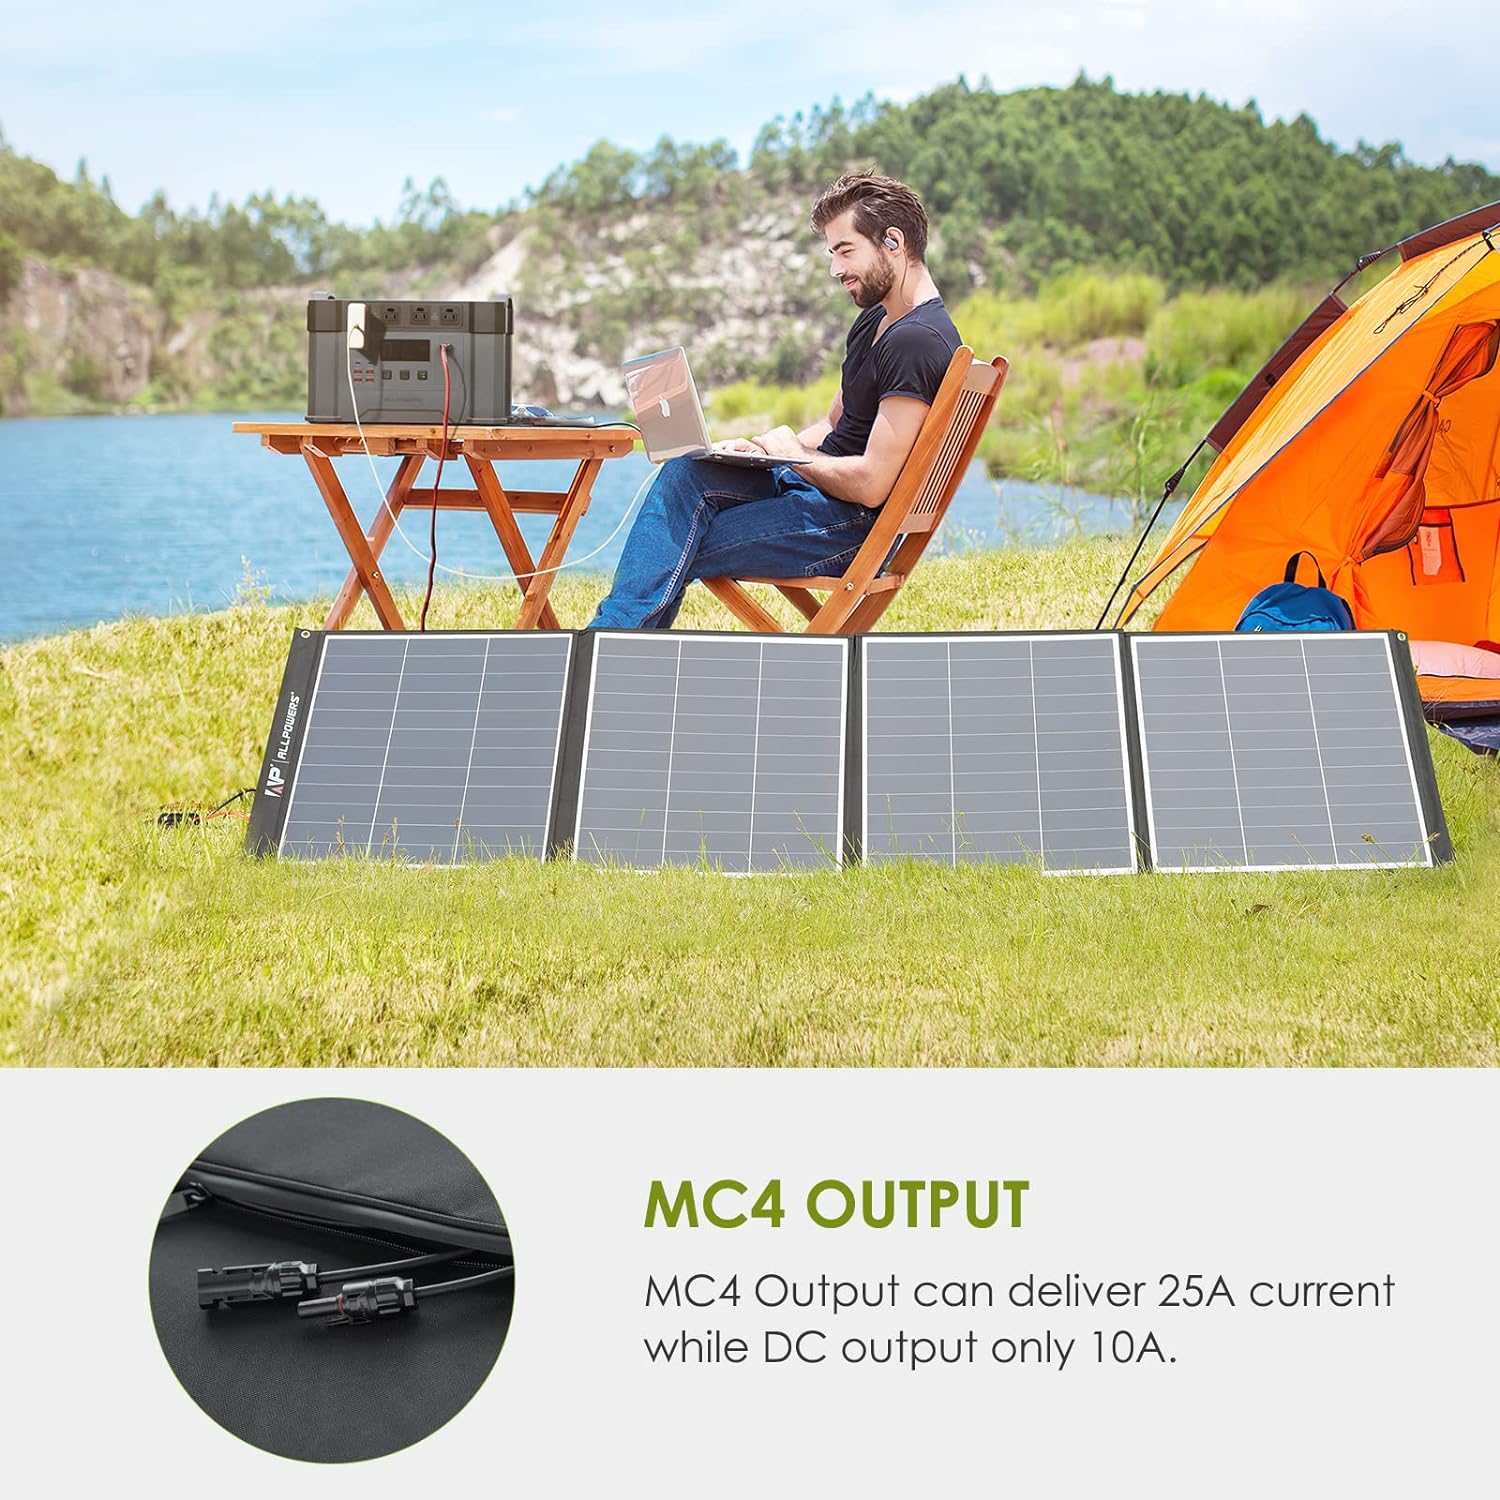 ALLPOWERS SP035 200W Portable Solar Panel Charger Monocrystalline Foldable Solar Panel Kit with MC-4 Output Solar Power Battery for RV Solar Generator Outdoor Camping Off Grid Van - ALLPOWERS SP035 200W Portable Solar Panel Charger Review